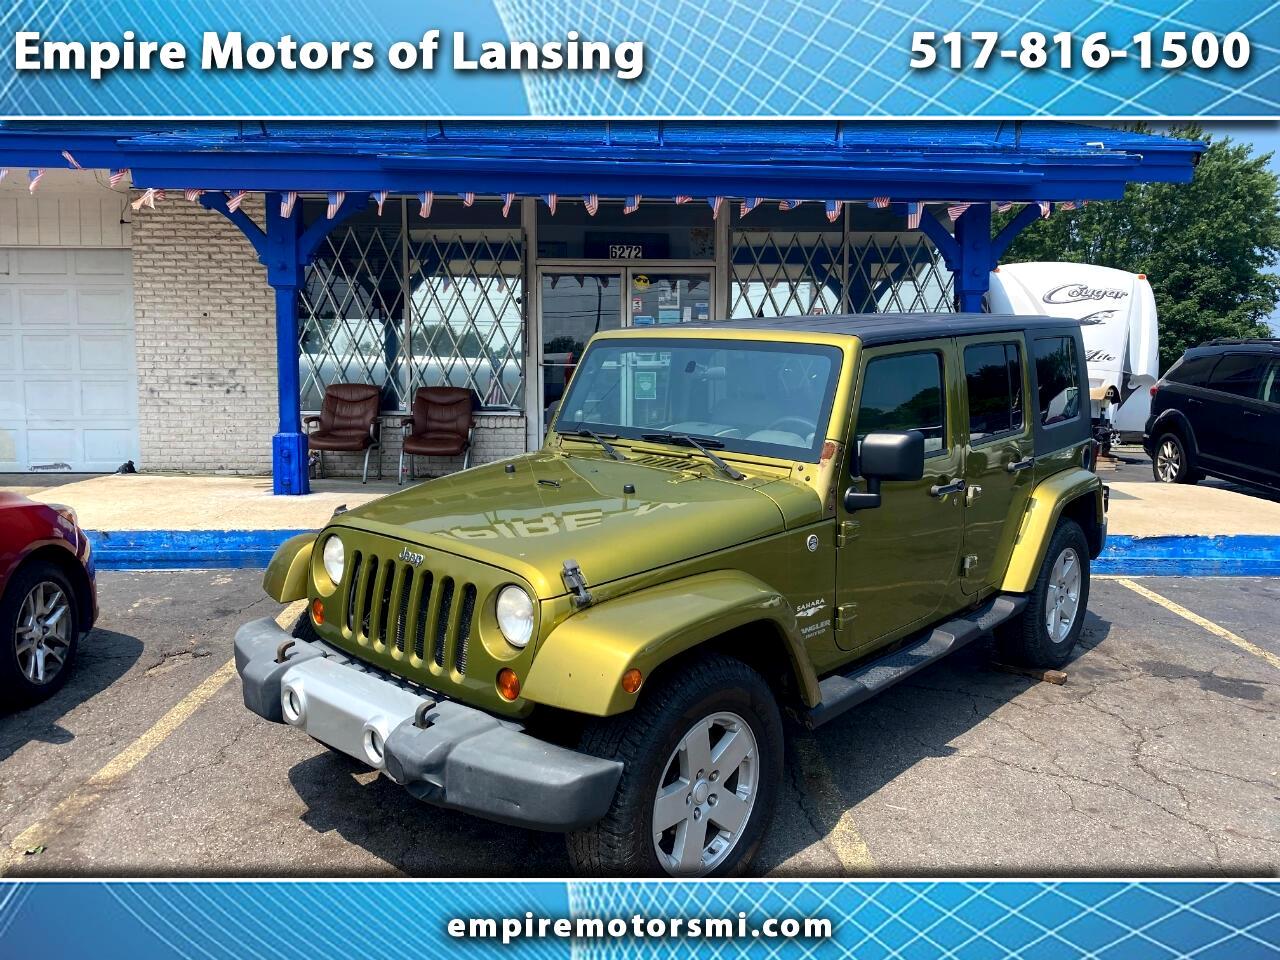 Used 2008 Jeep Wrangler Unlimited Sahara 4WD for Sale in Lansing MI 48910  Empire Motors of Lansing